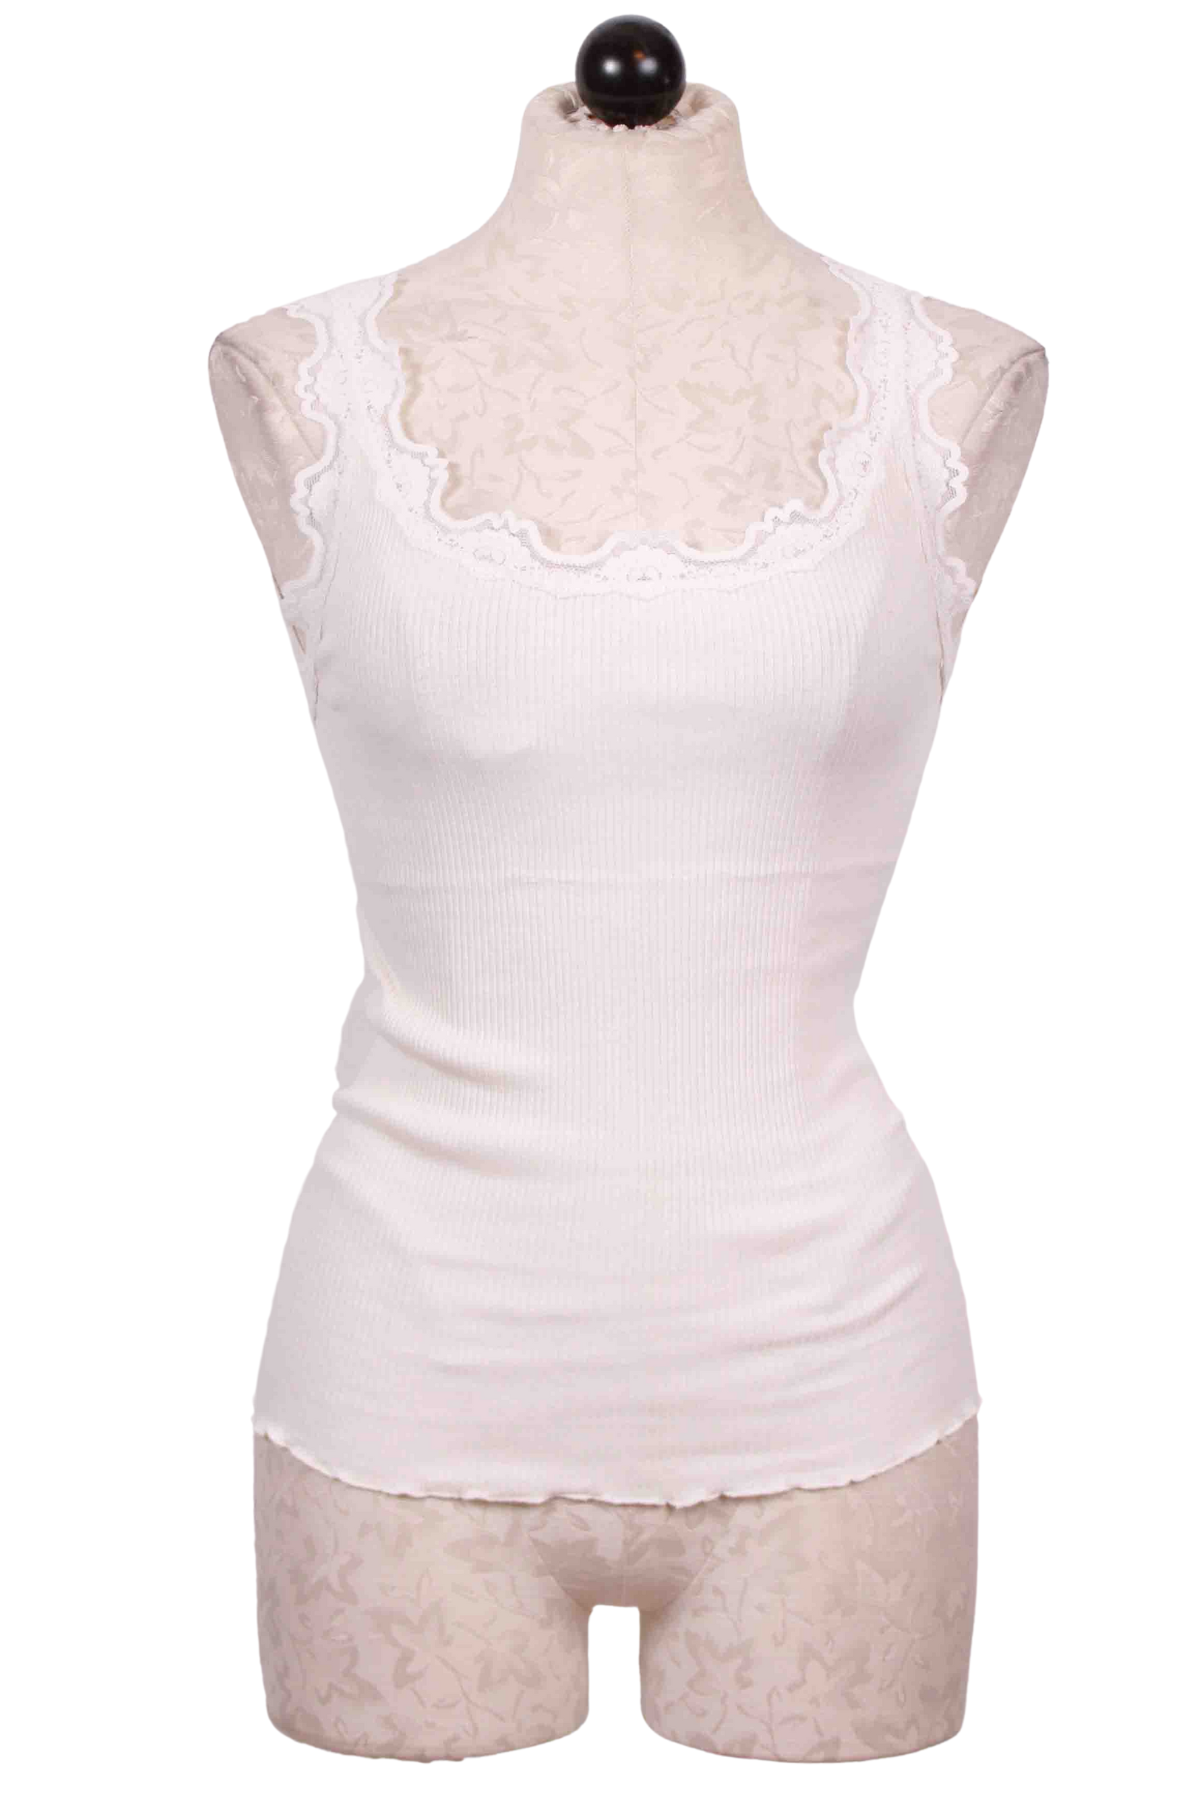 New White Babette Silk Cami with Vintage Lace Trim by Rosemunde